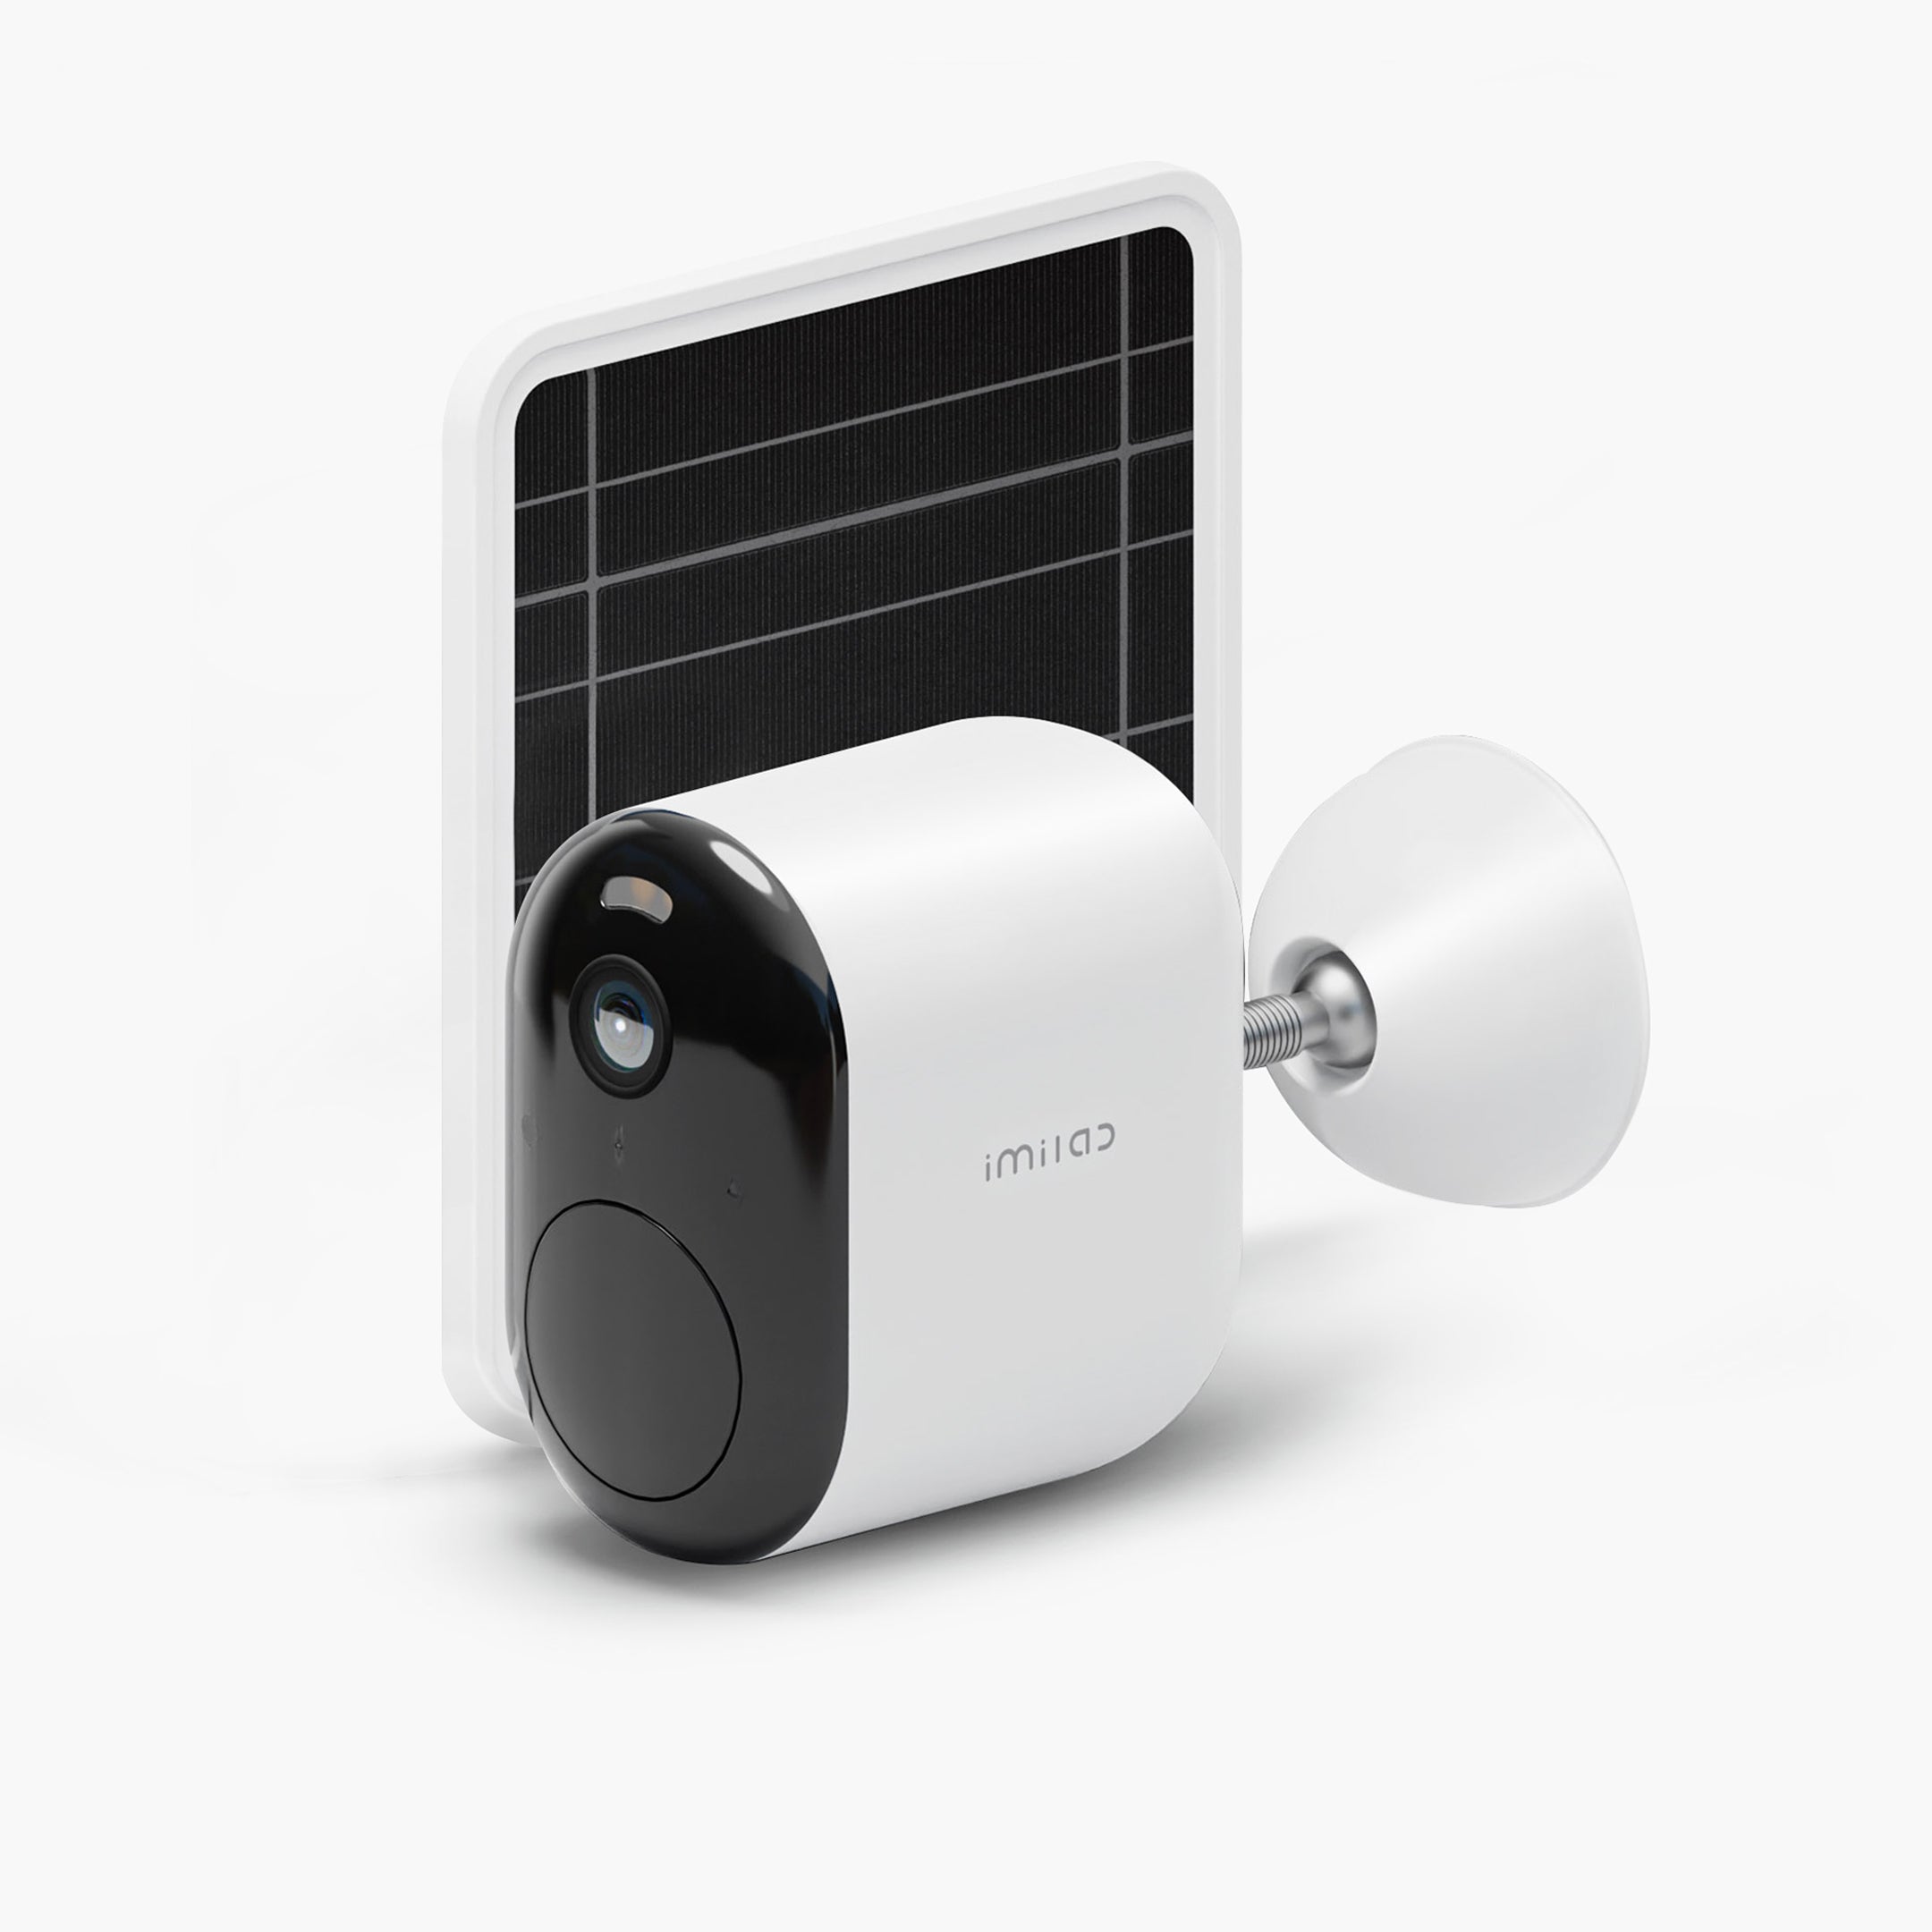 White-ec4-security-camera-on-white-background-with-solar-charging-panel-behind